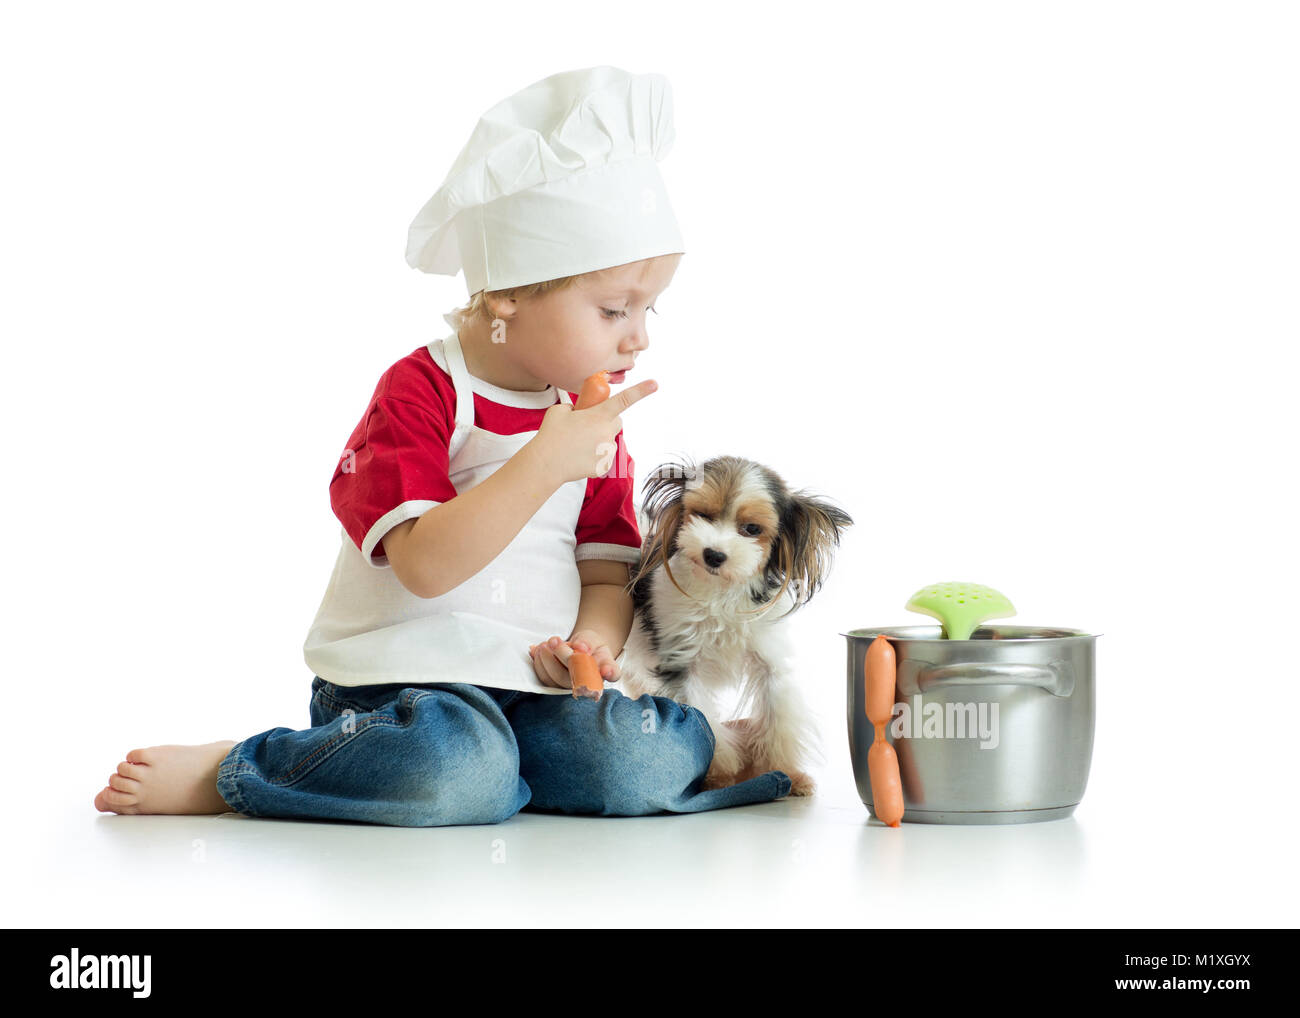 Cute kid boy dressed cook plays with funny dogs isolated Stock Photo